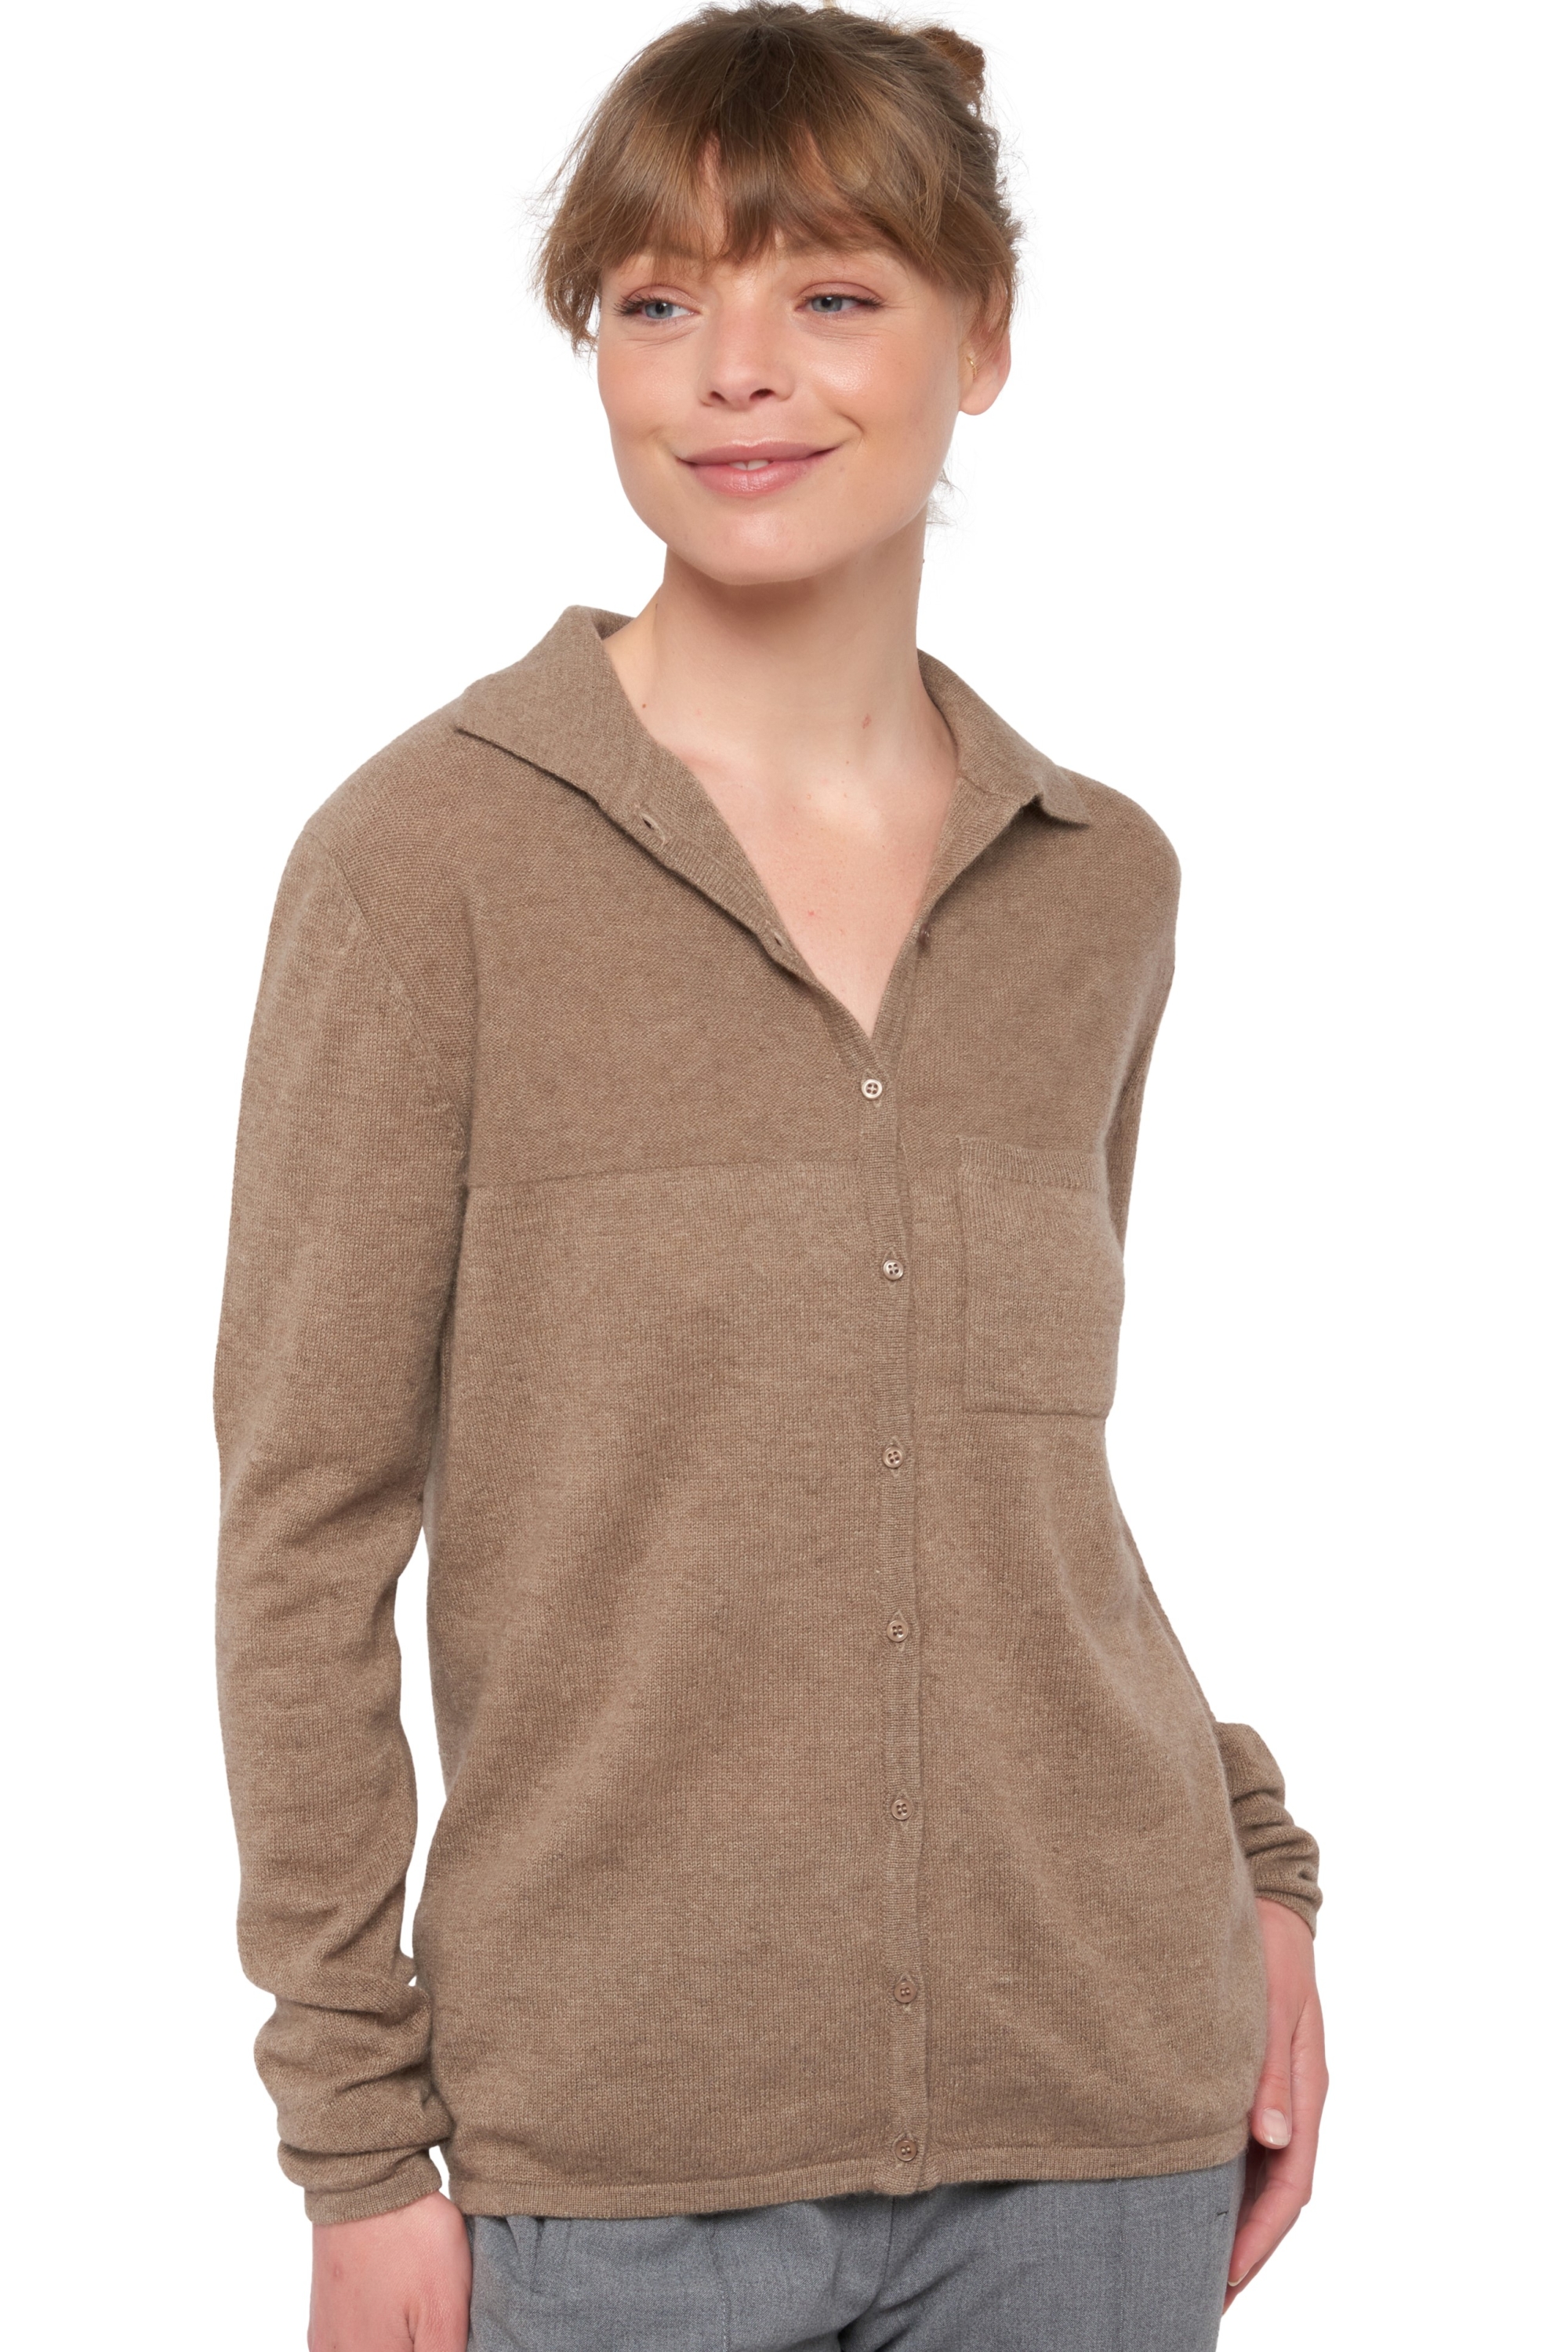 Cachemire pull femme soldes umea natural brown xl